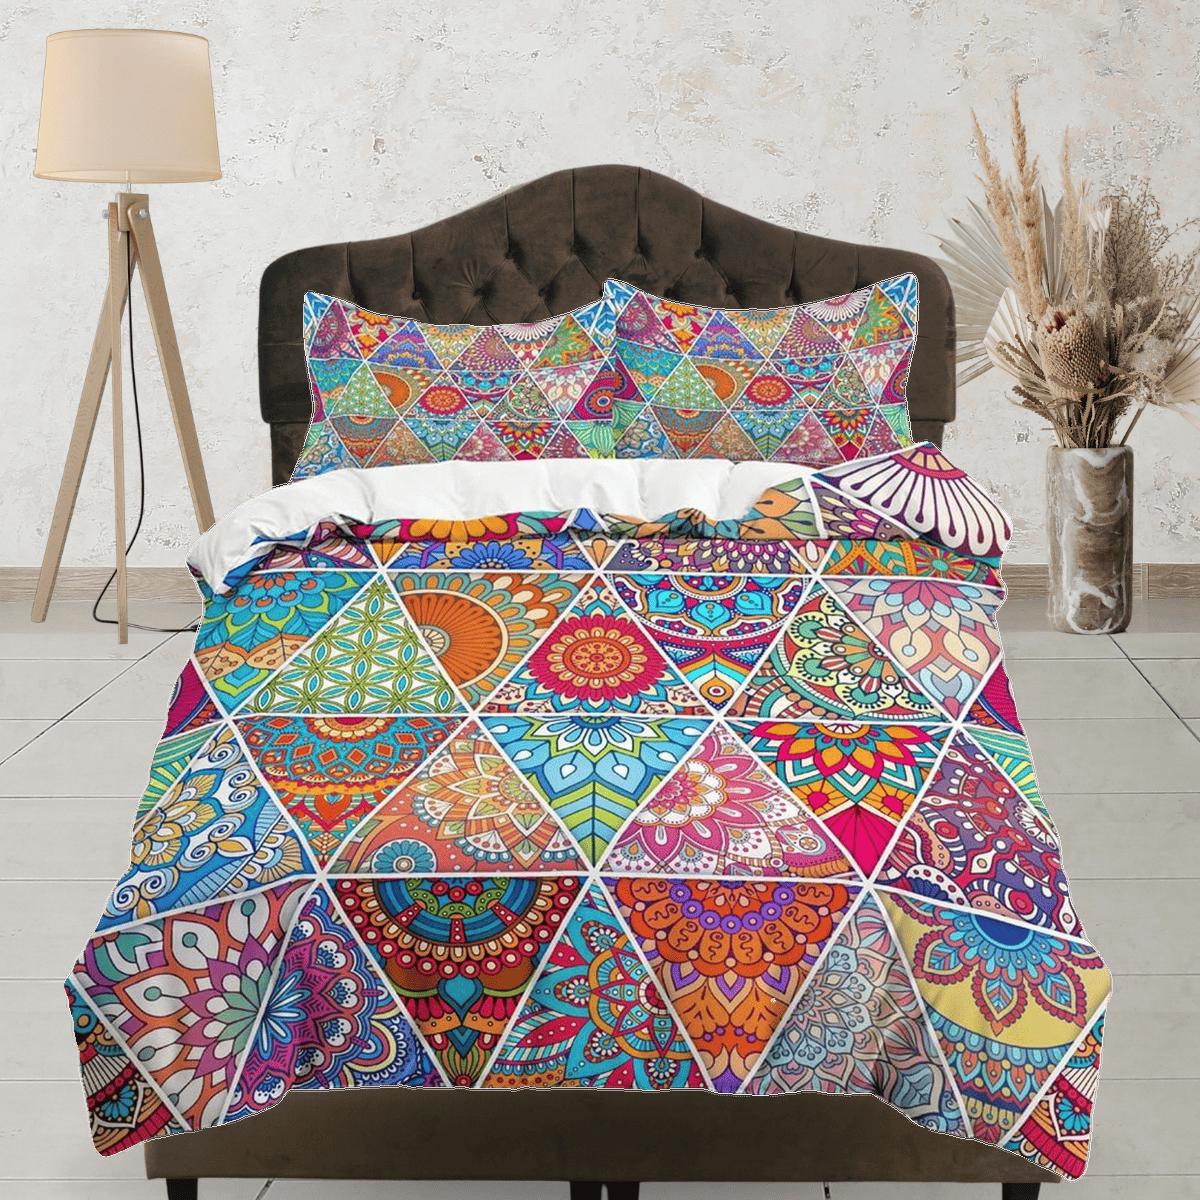 daintyduvet Colorful mexican patchwork quilt printed duvet cover set, aesthetic room bedding set full, king, queen size, boho bedspread shabby chic